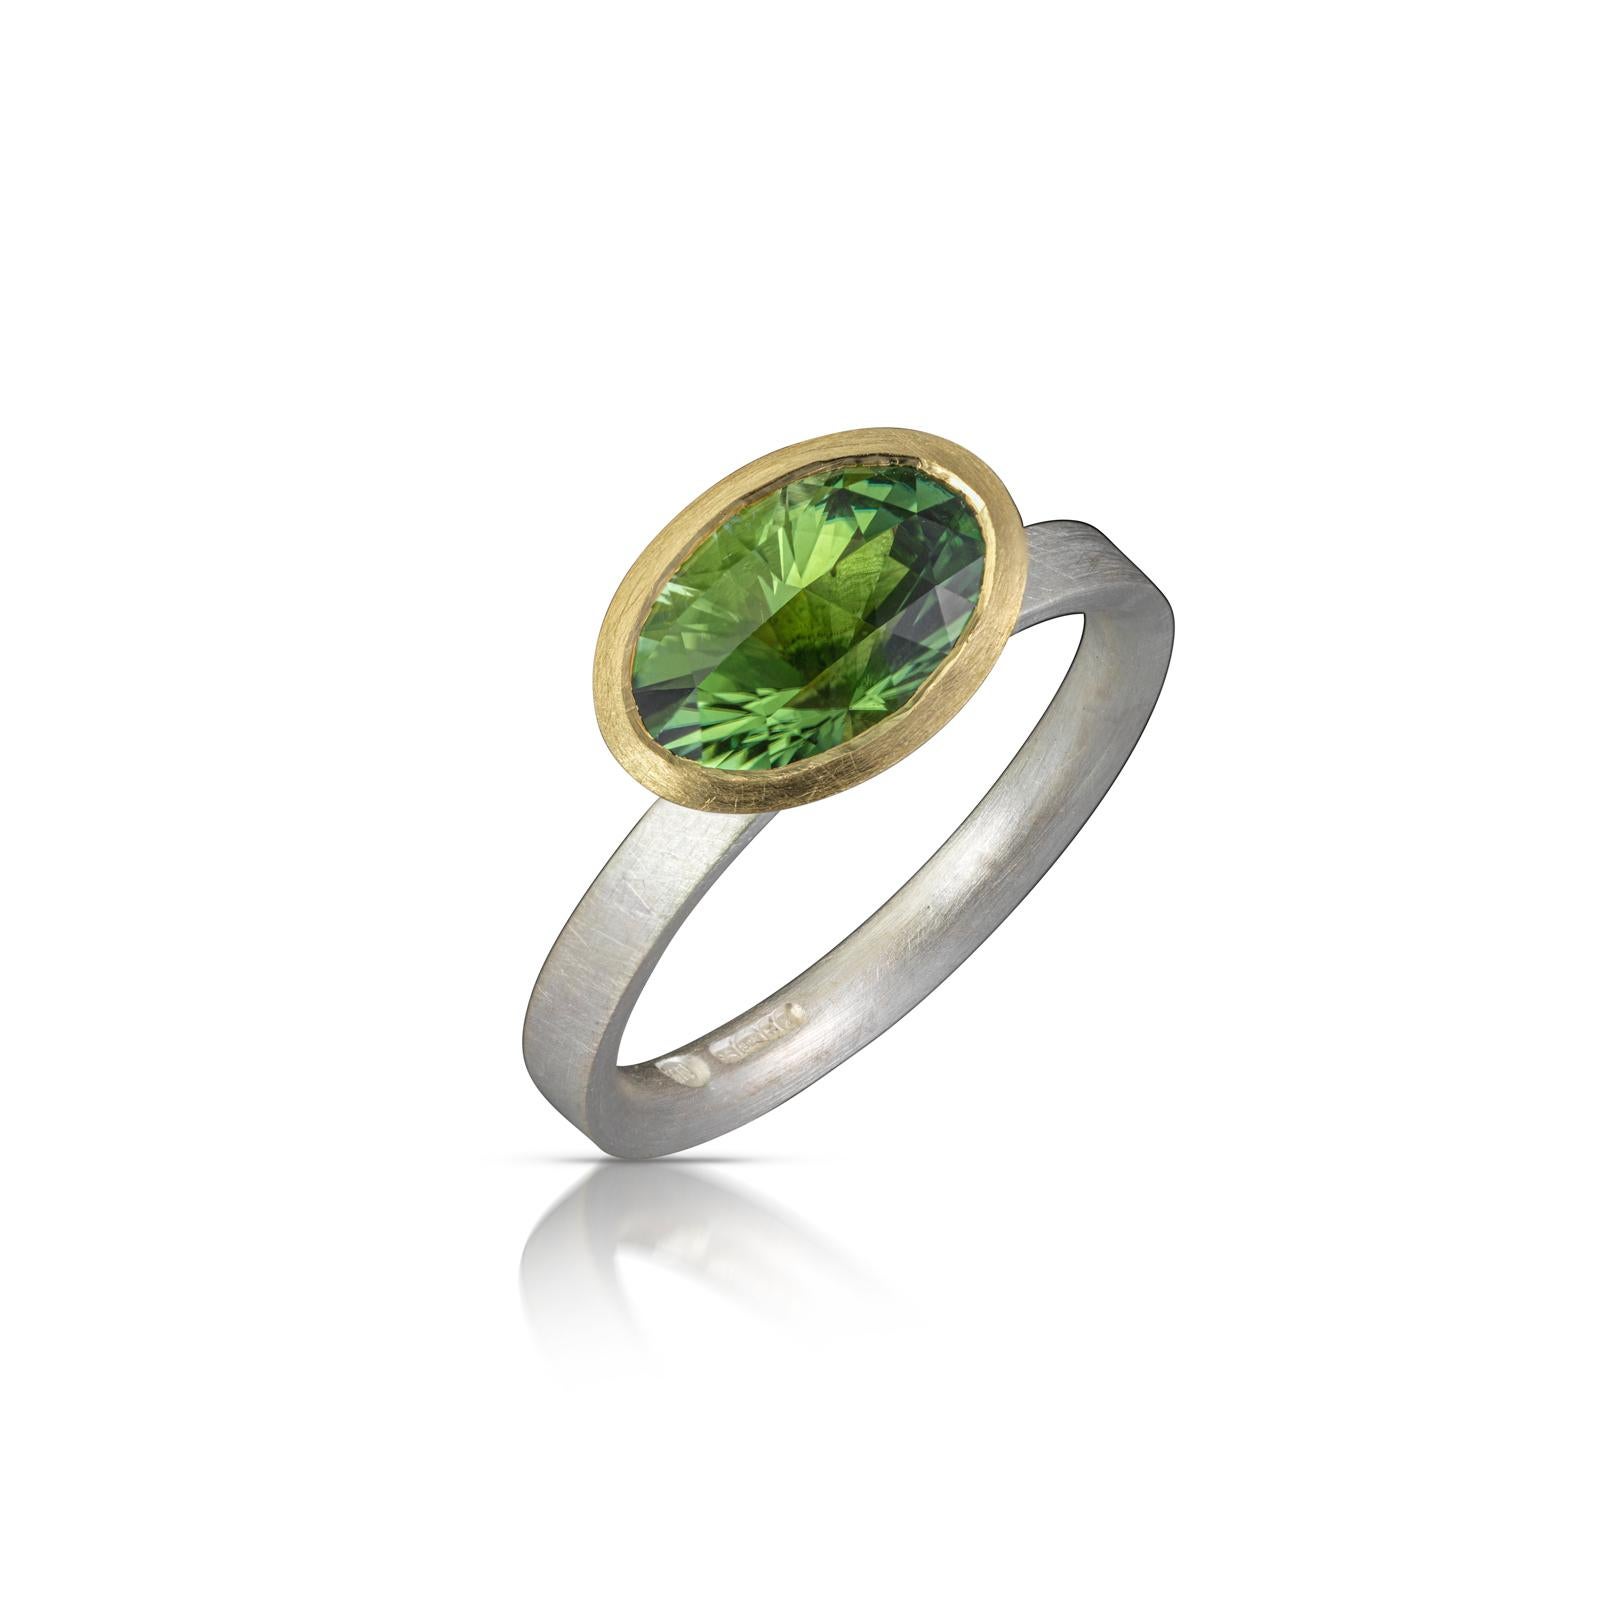 Bright green faceted tourmaline engagement or statement ring. The stone is set in 18ct yellow gold on an inverted D section sterling silver band.


Item Details
- Oval green tourmaline 2.50cts, hand cut and polished by Mark Nuell in a Long &